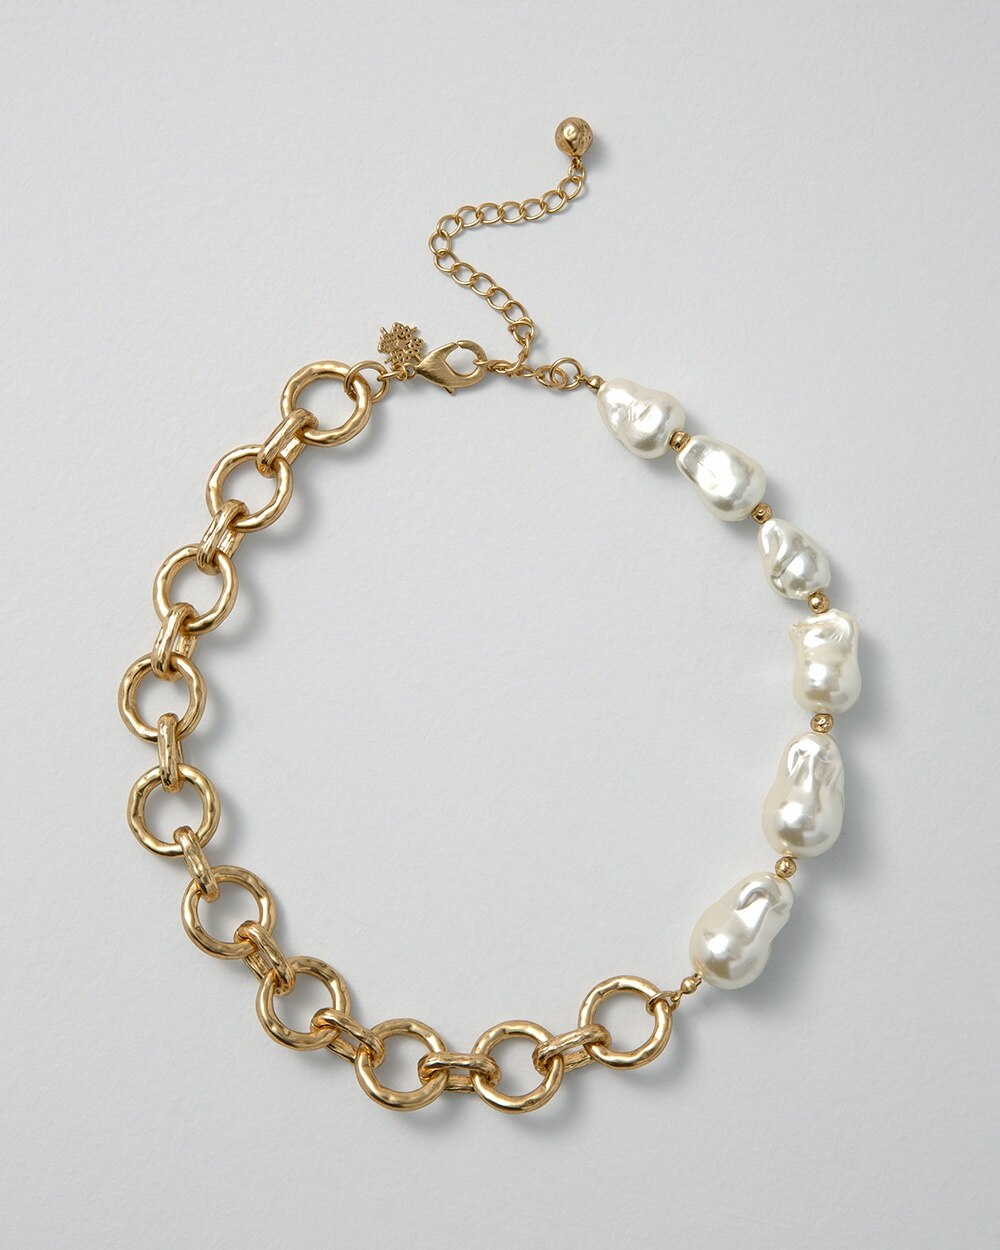 Goldtone Chain & Faux Pearl Necklace